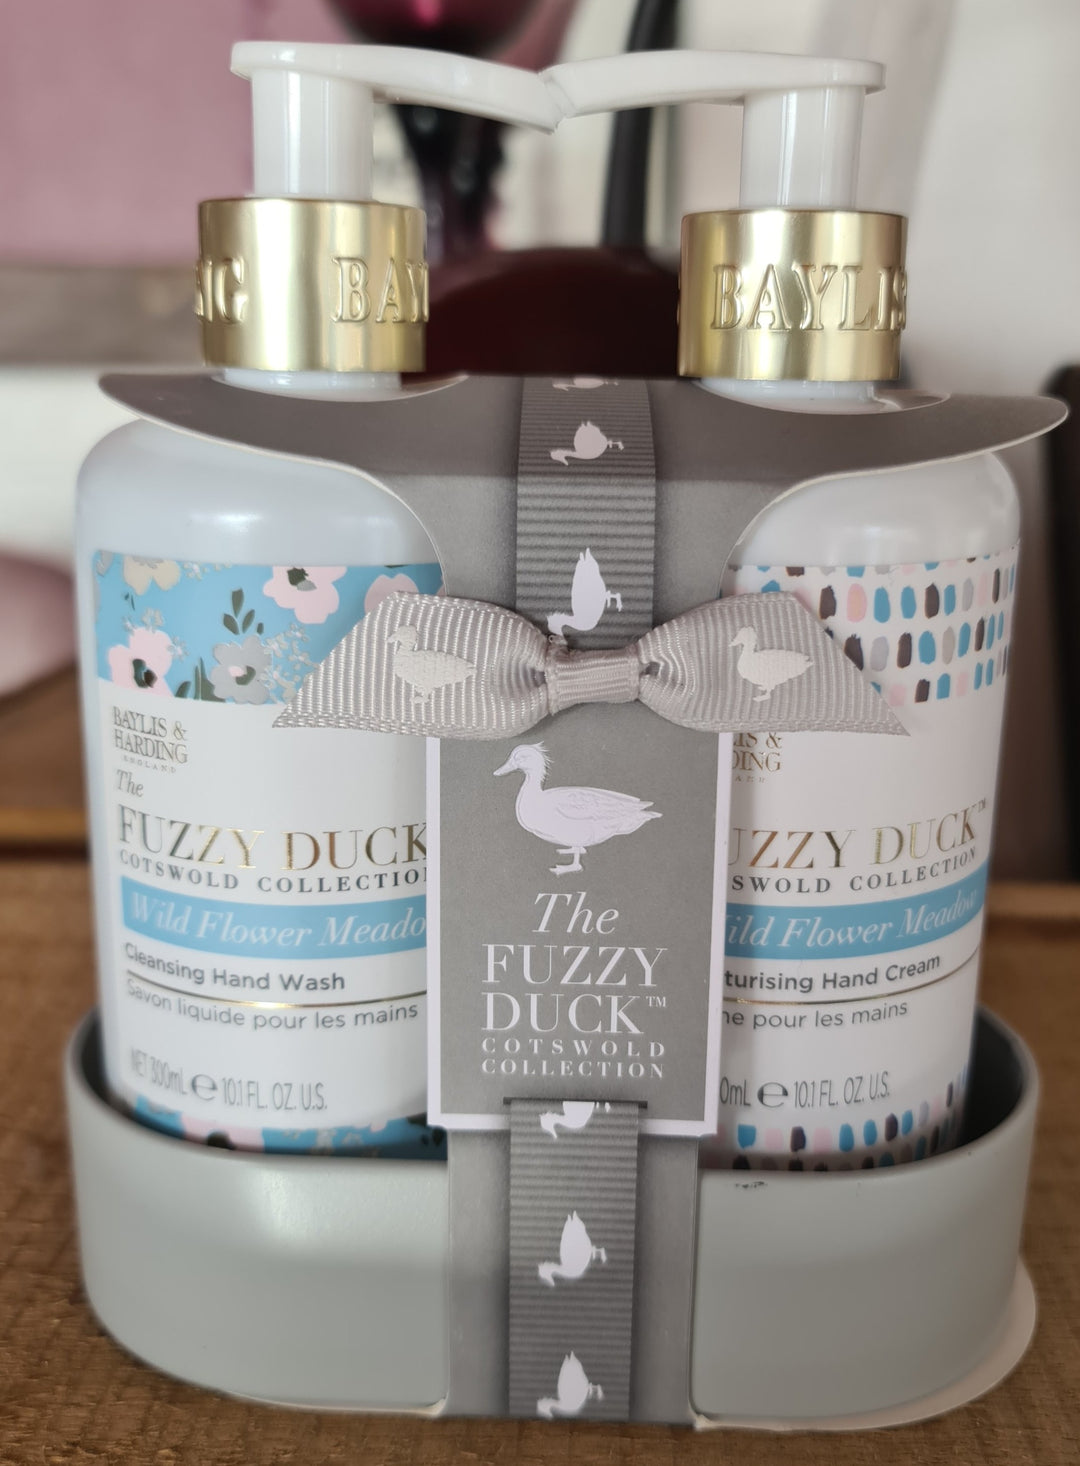 Baylis & Harding , "The Fuzzy Duck "  - Cotswolds Collection  2er Set Seife und Hand Creme - British Moments